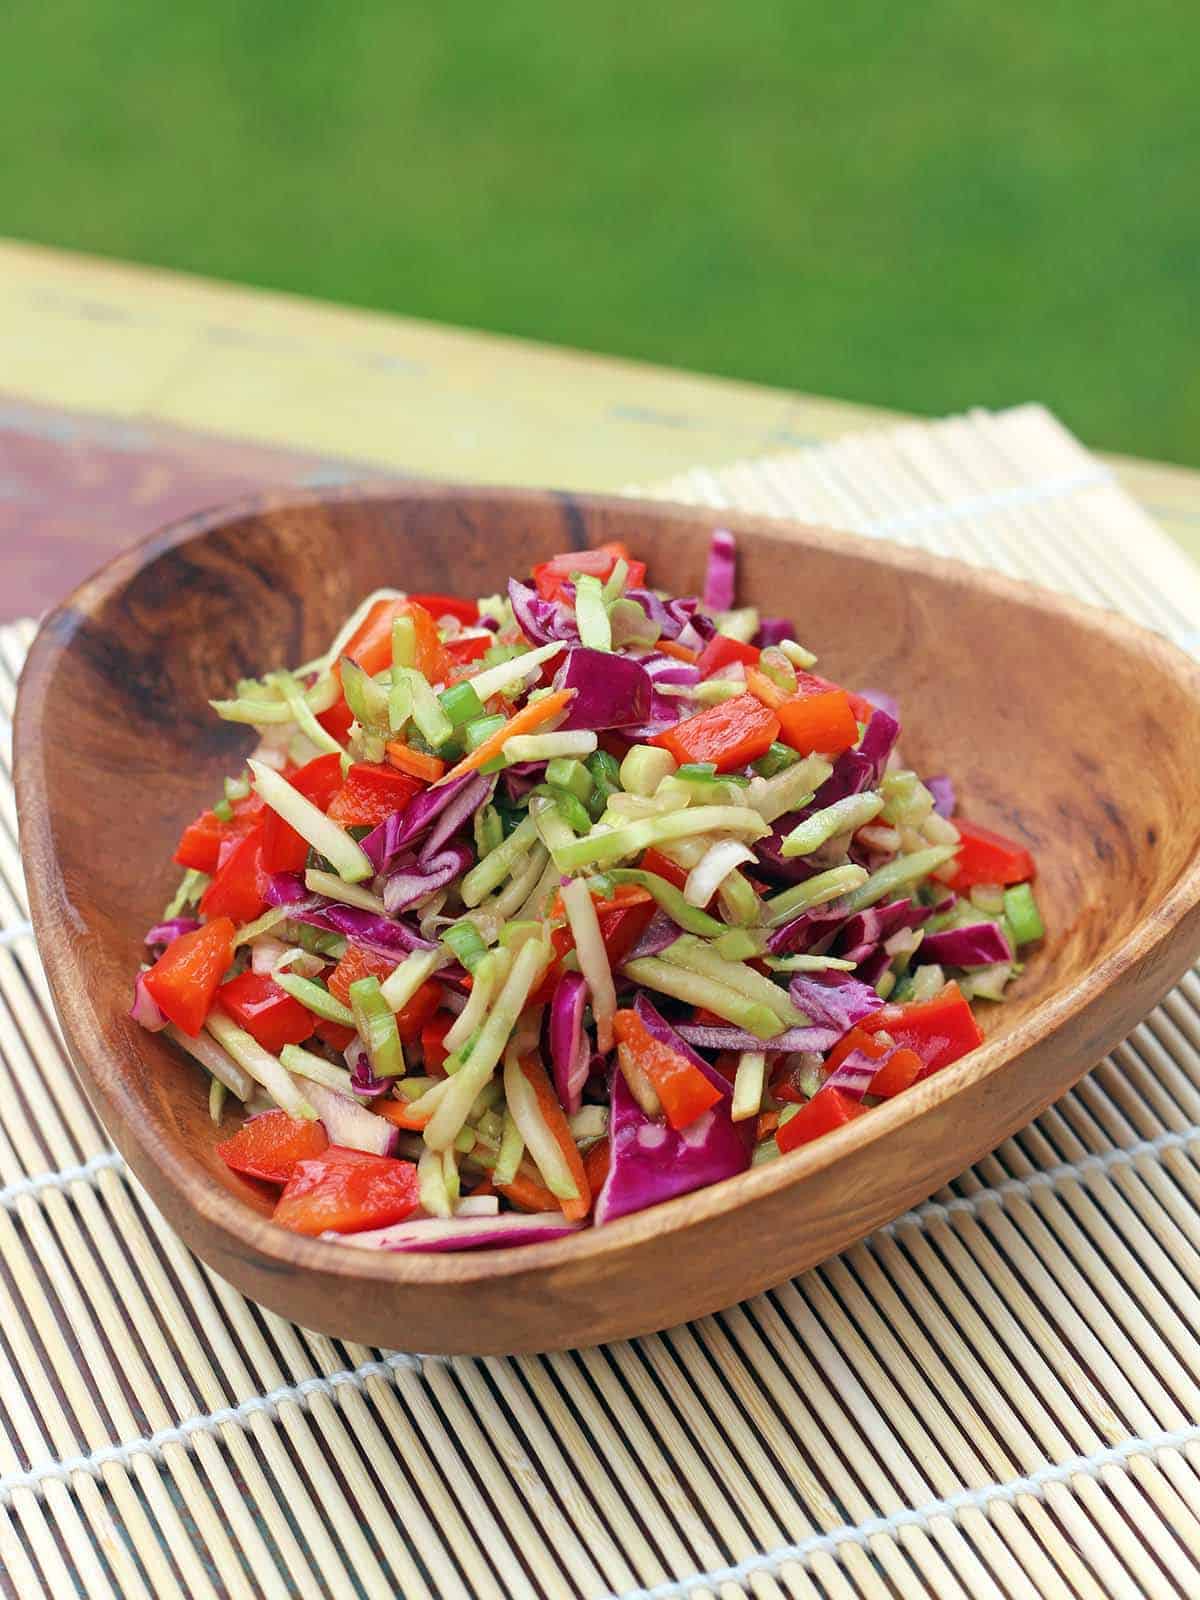 Sesame Broccoli Slaw in a wooden serving bowl on a decorative placemat